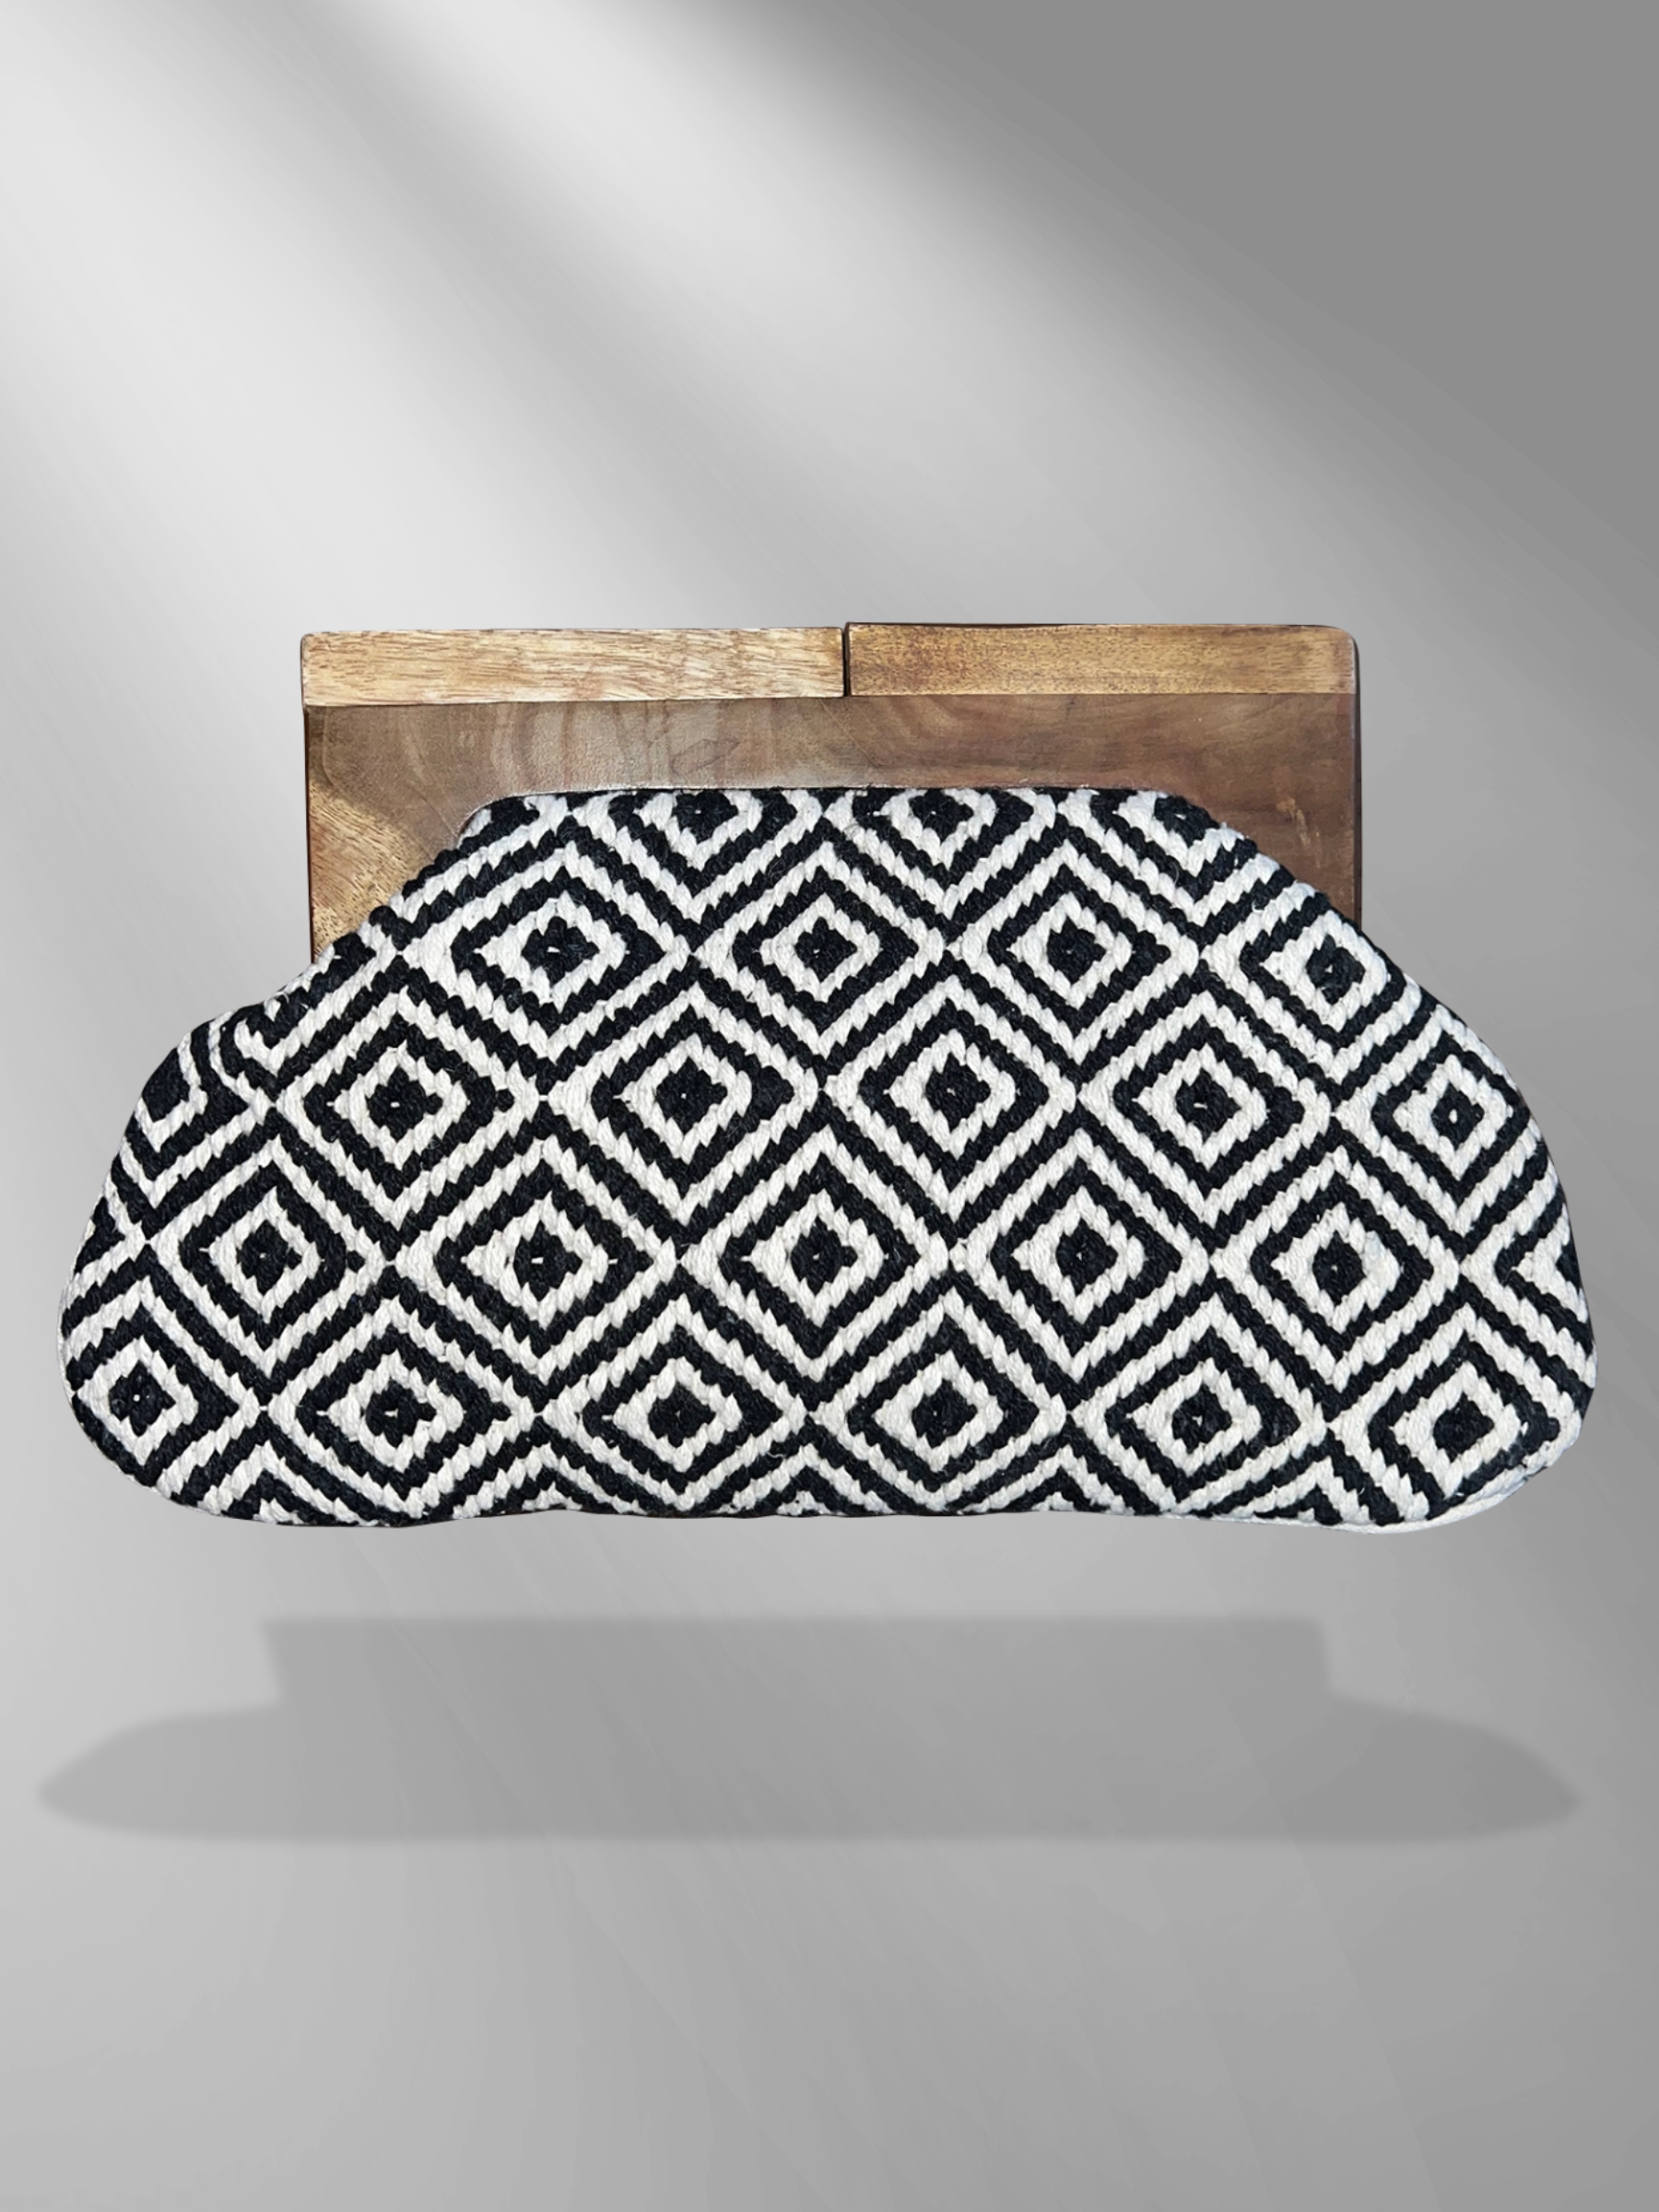 GOLDxTEAL gorgeous wooden handle clutch with black and white woven tapestry.